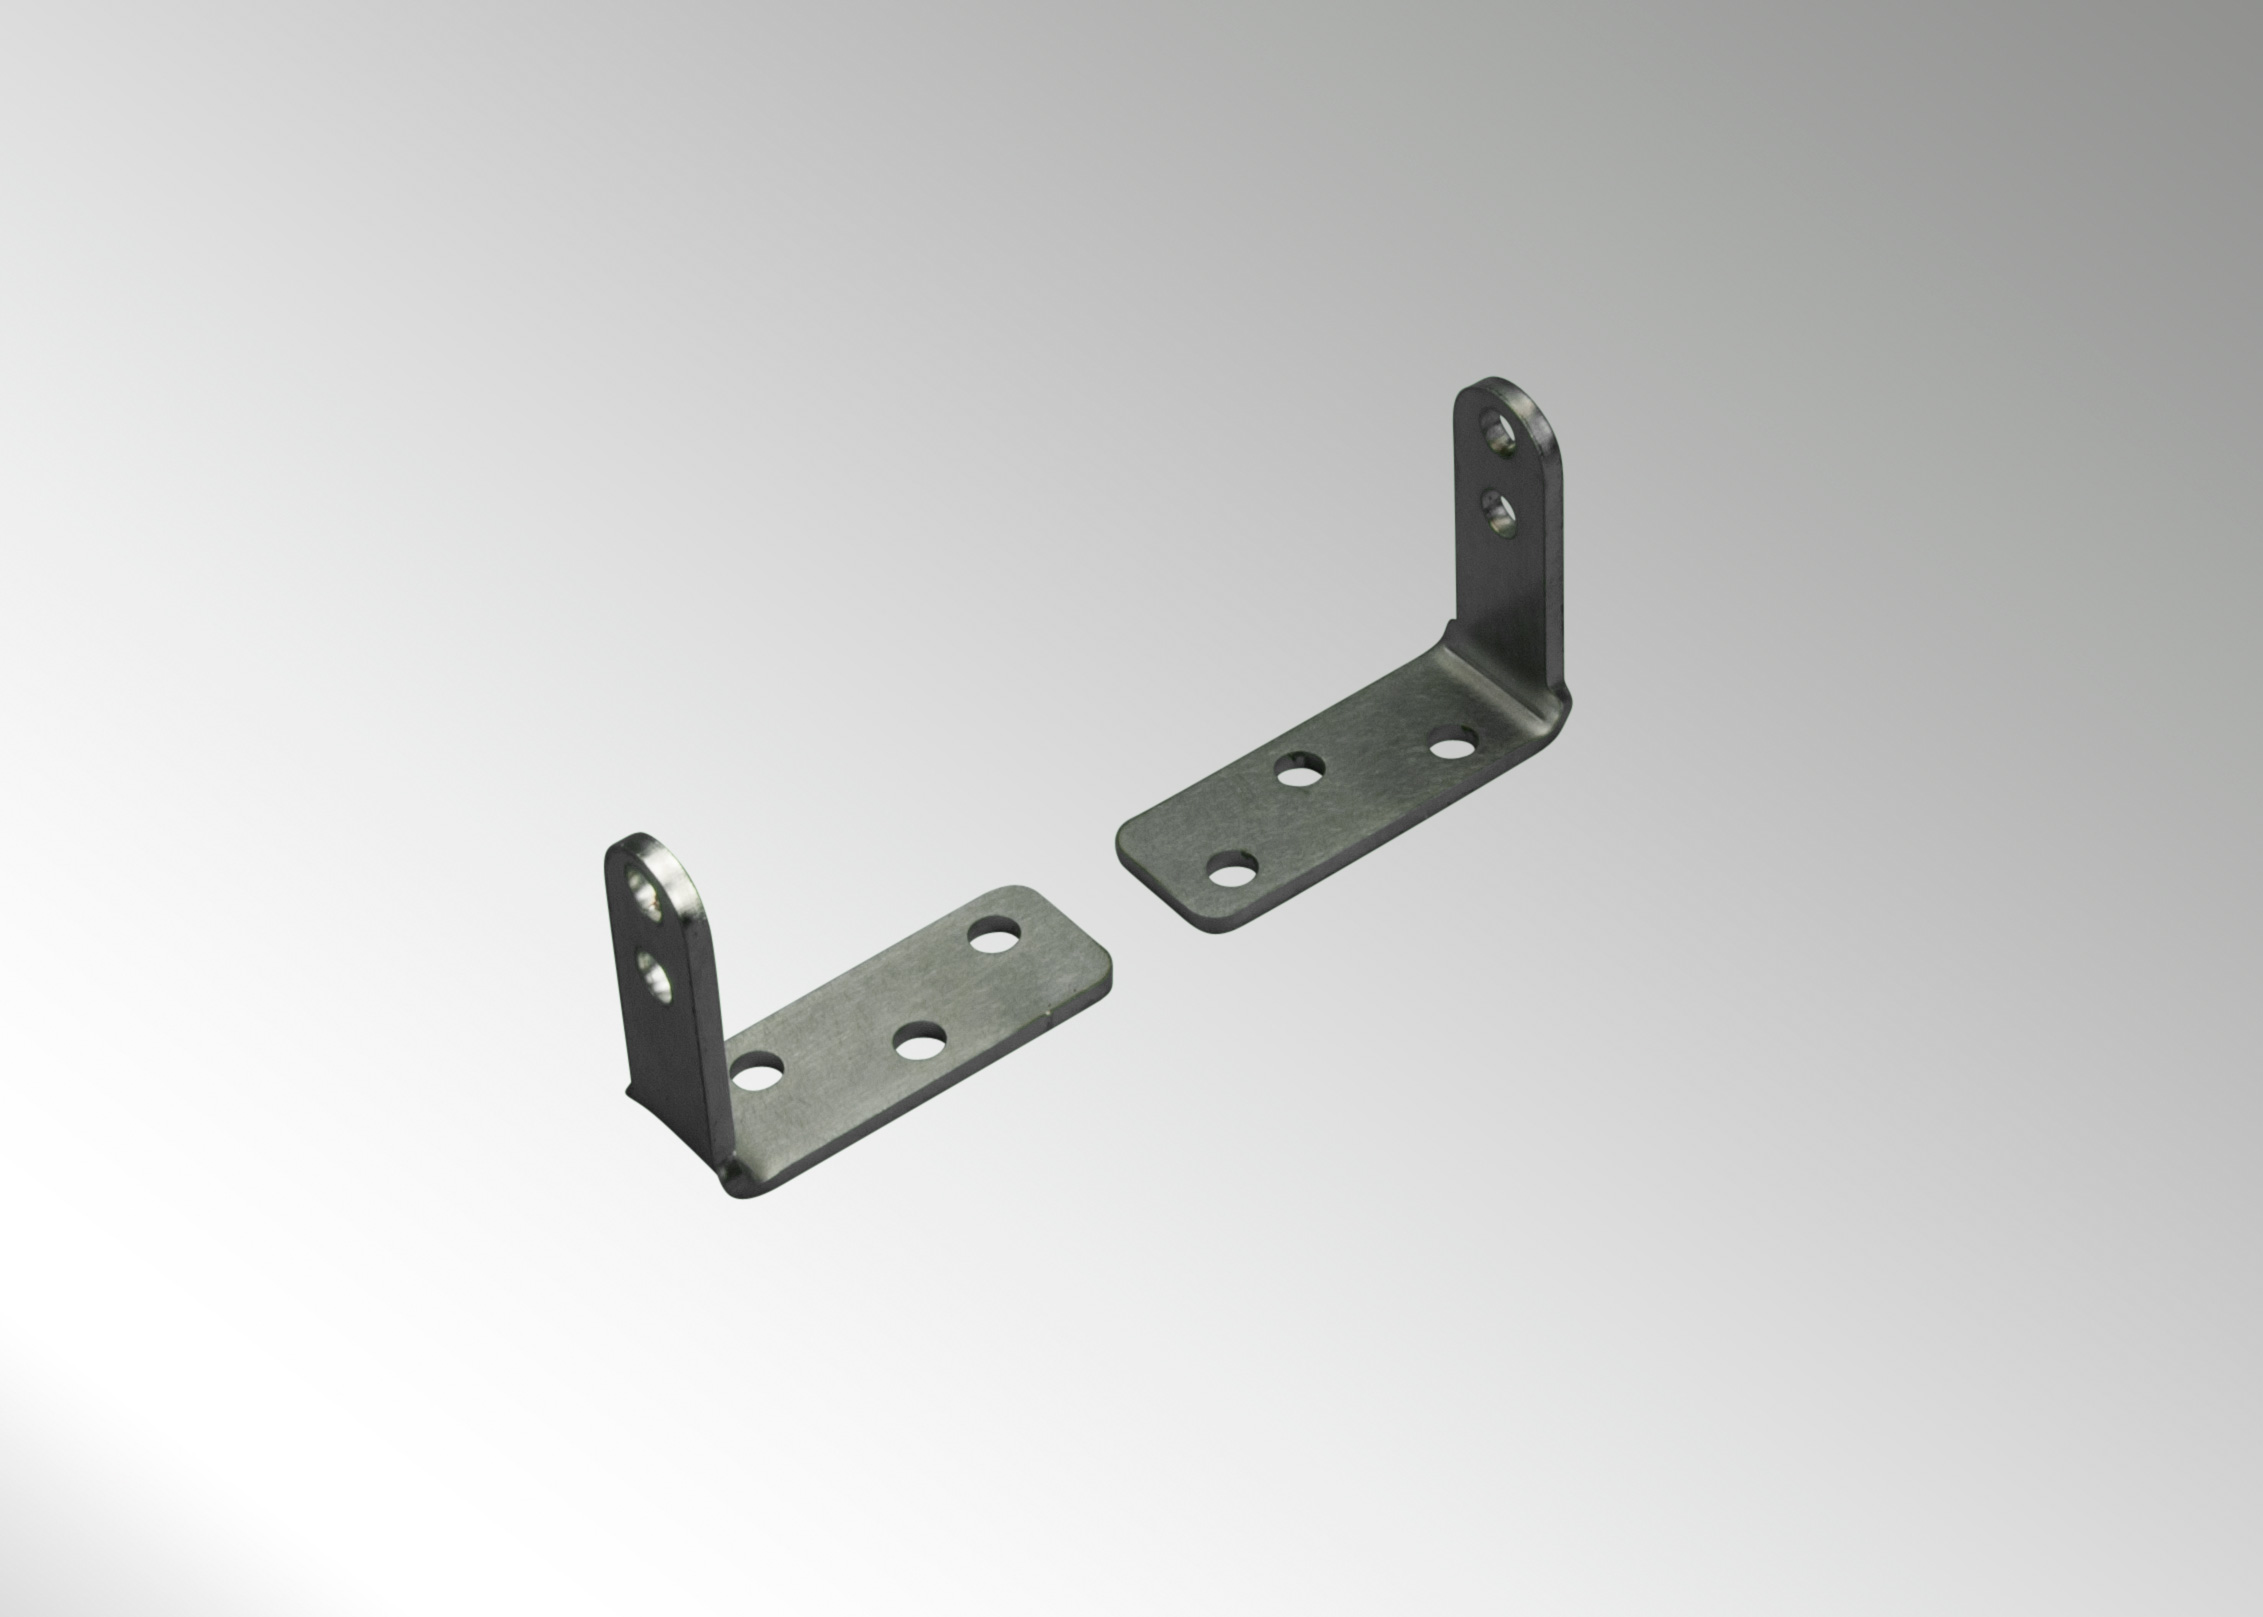 Mounting kit type K-K50-K- (M5) for chain actuator EA-K-50 / XXXX, for inward opening mounting